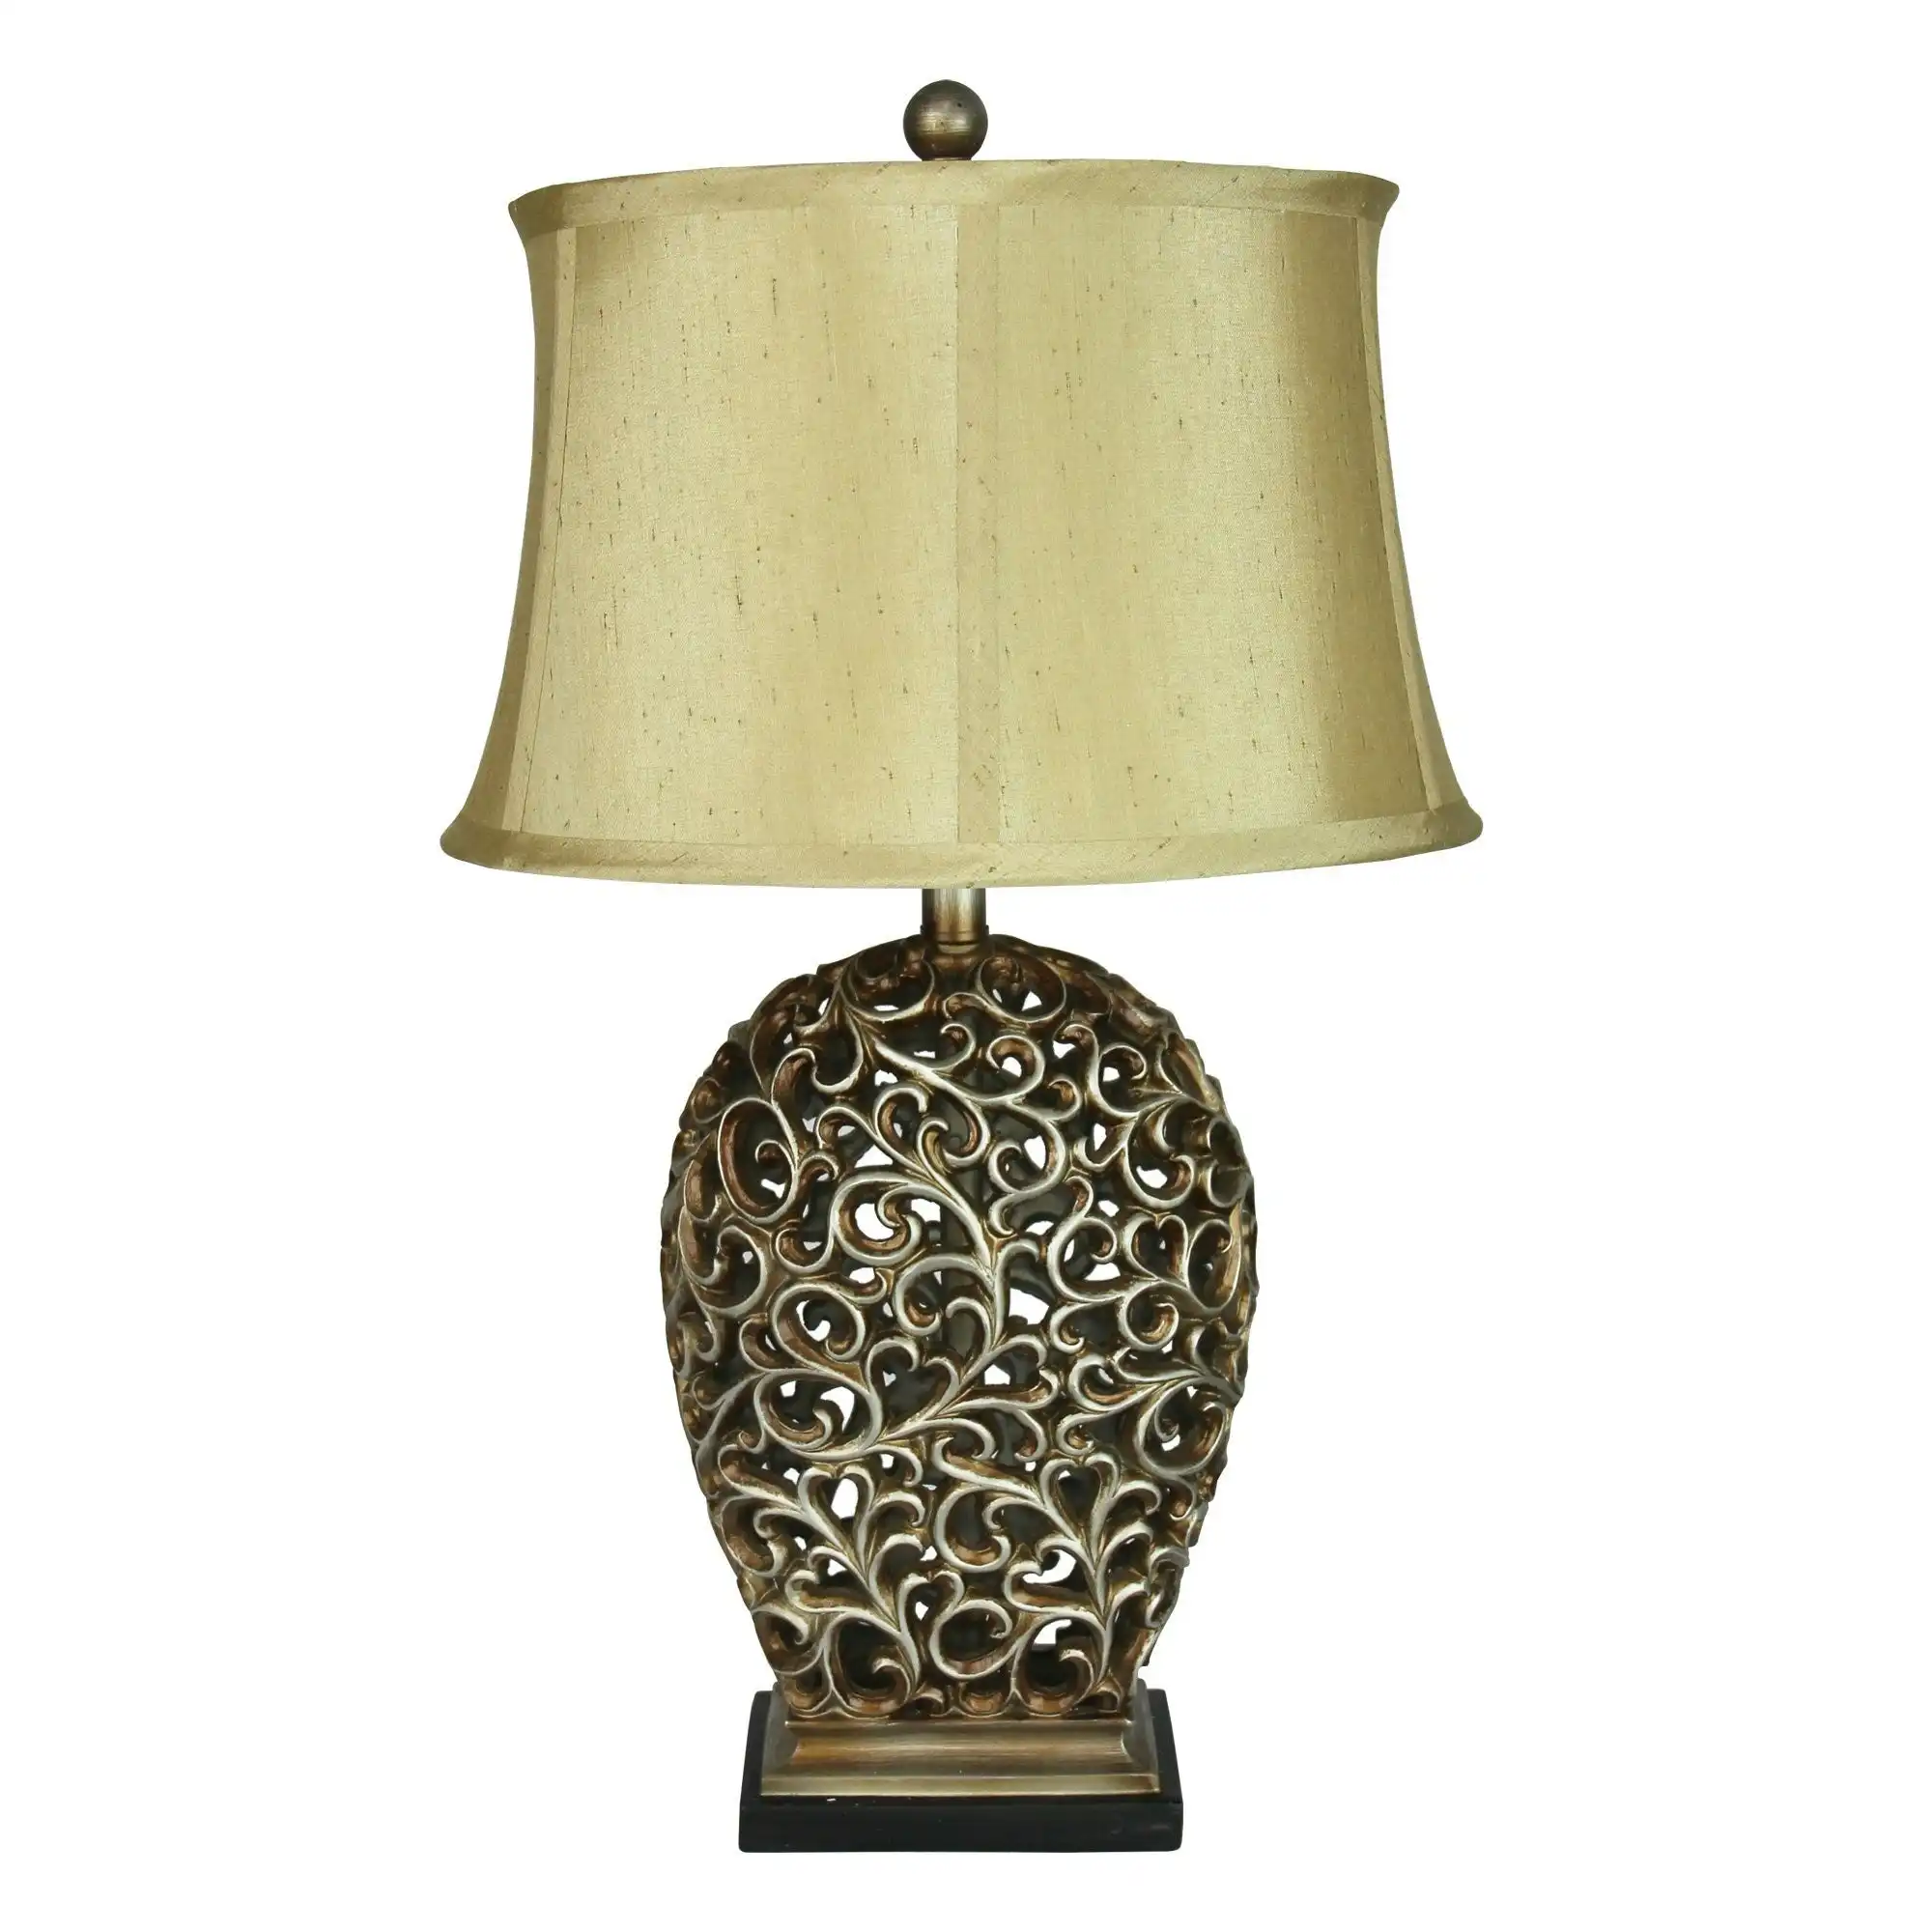 DONATI Classically Styled Table Lamp with Harp Shade